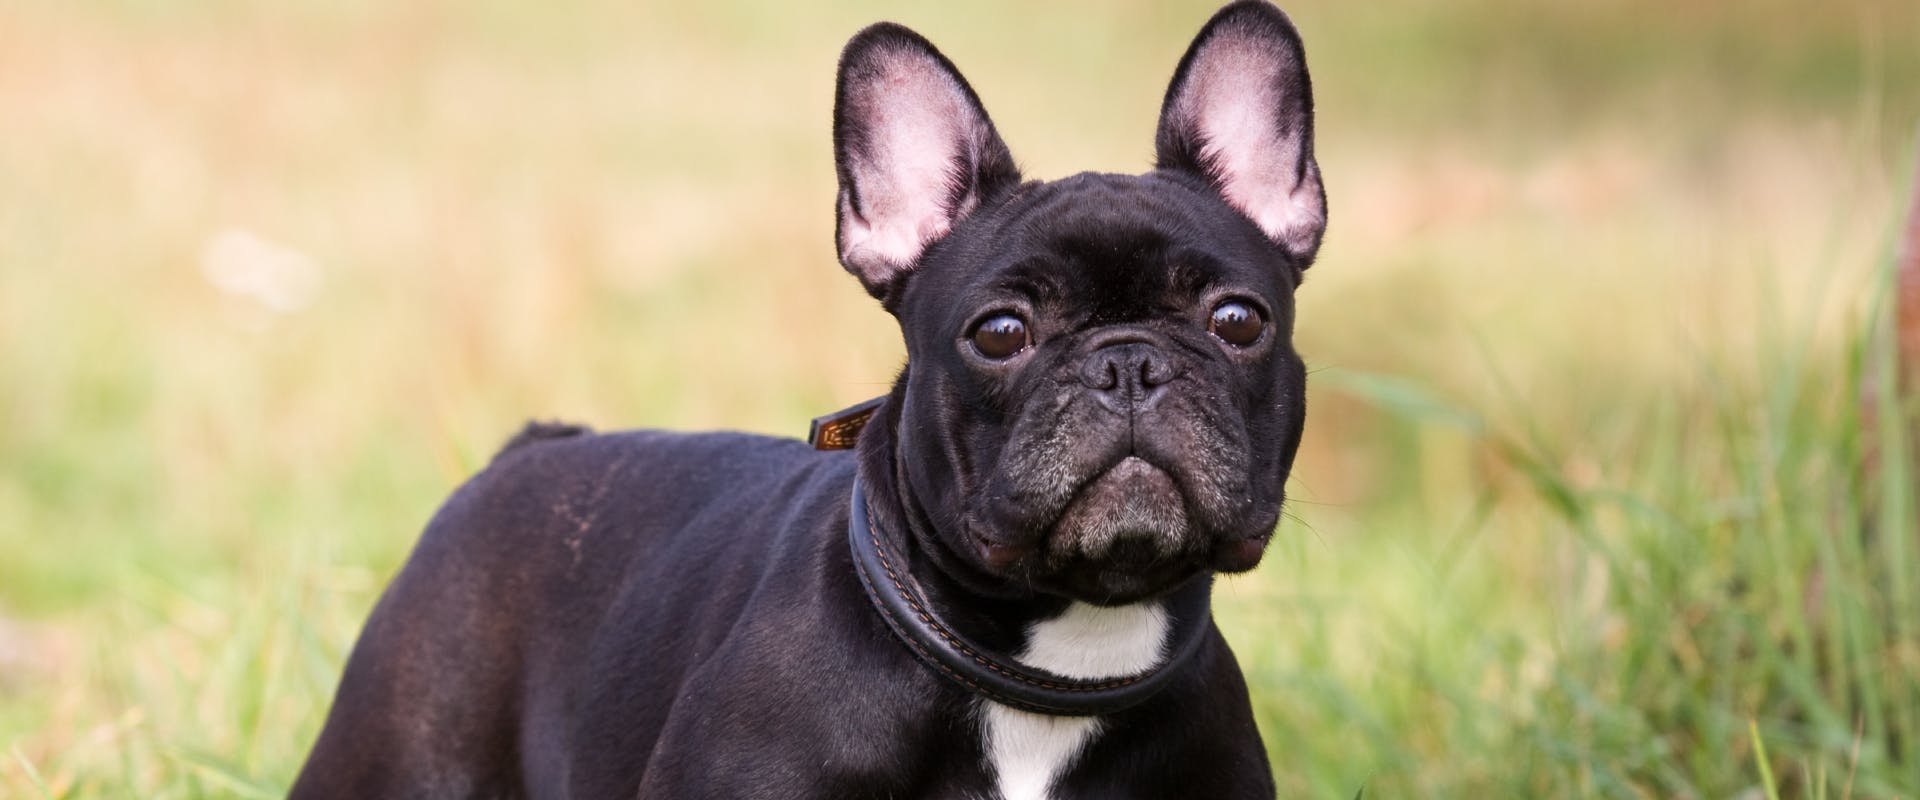 French Bulldog sat outside in a field of grass